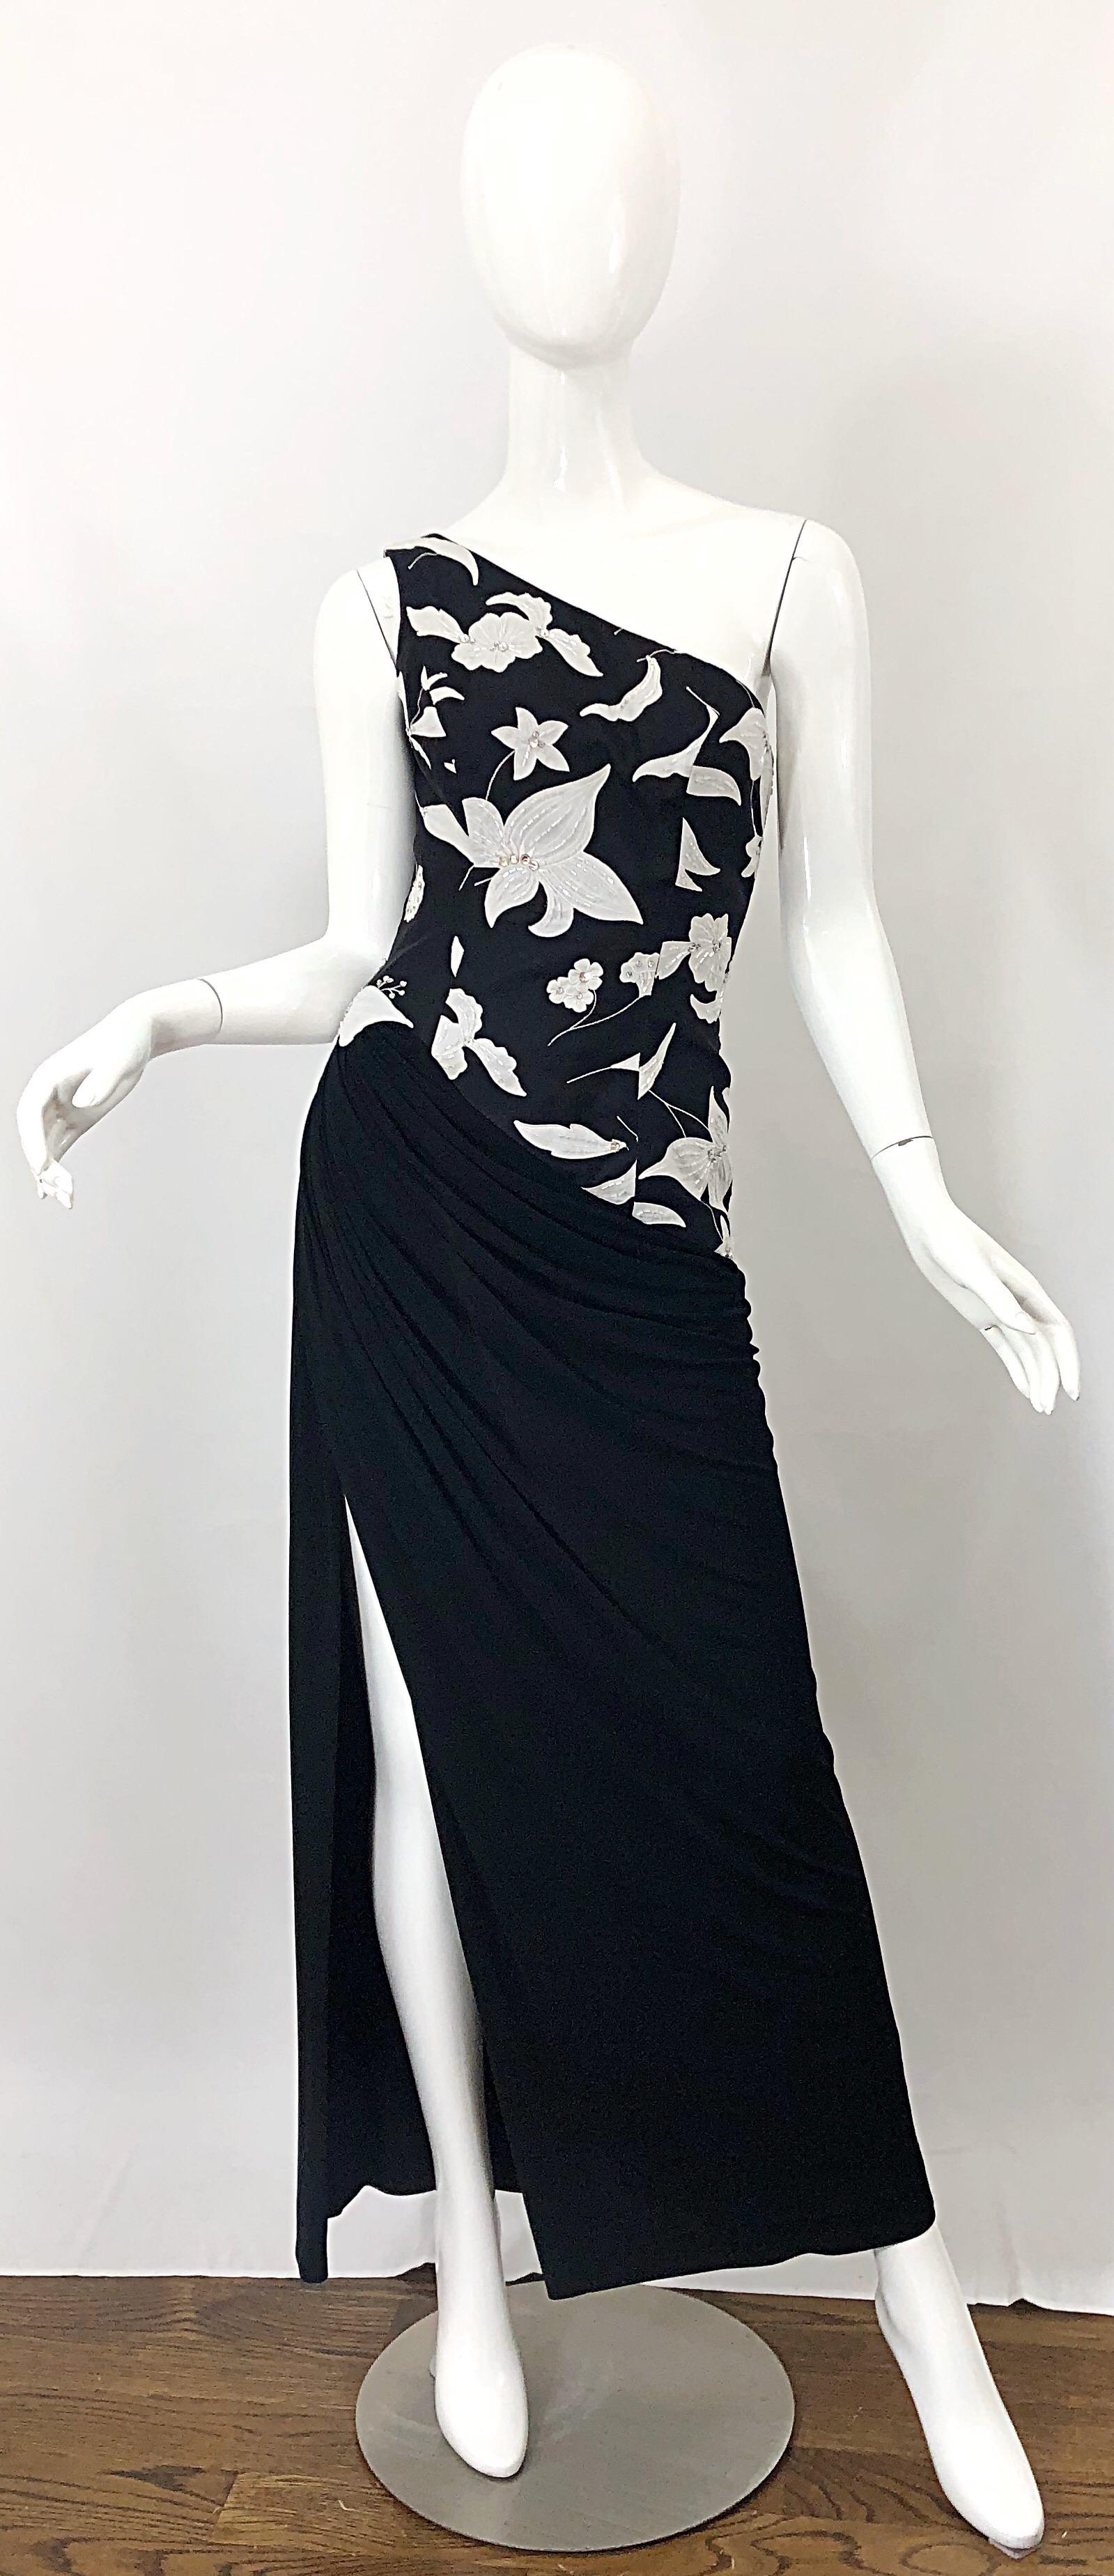 Beautiful vintage early 1980s RUBEN PANIS black and white abstract print silk rayon one shoulder beaded and sequin evening gown! This dress features a fitted bodice with abstract floral print. Hundreds of hand-sewn sequins and beads throughout the